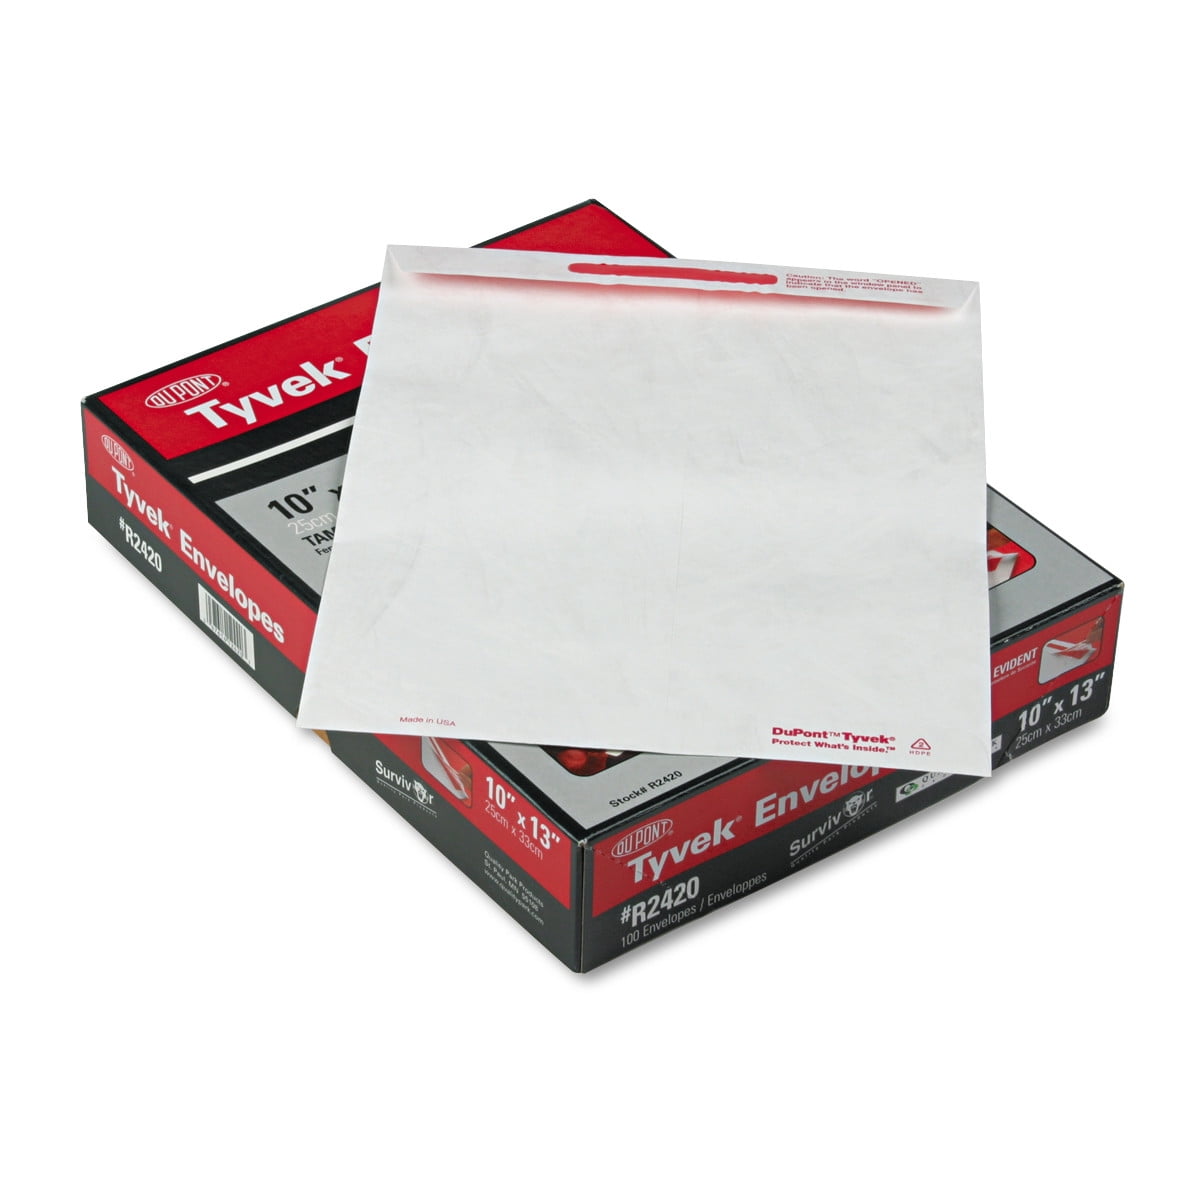 Box White #65858 Peel and Seal Tyvek 100 Business Source Envelopes 9" x 12"